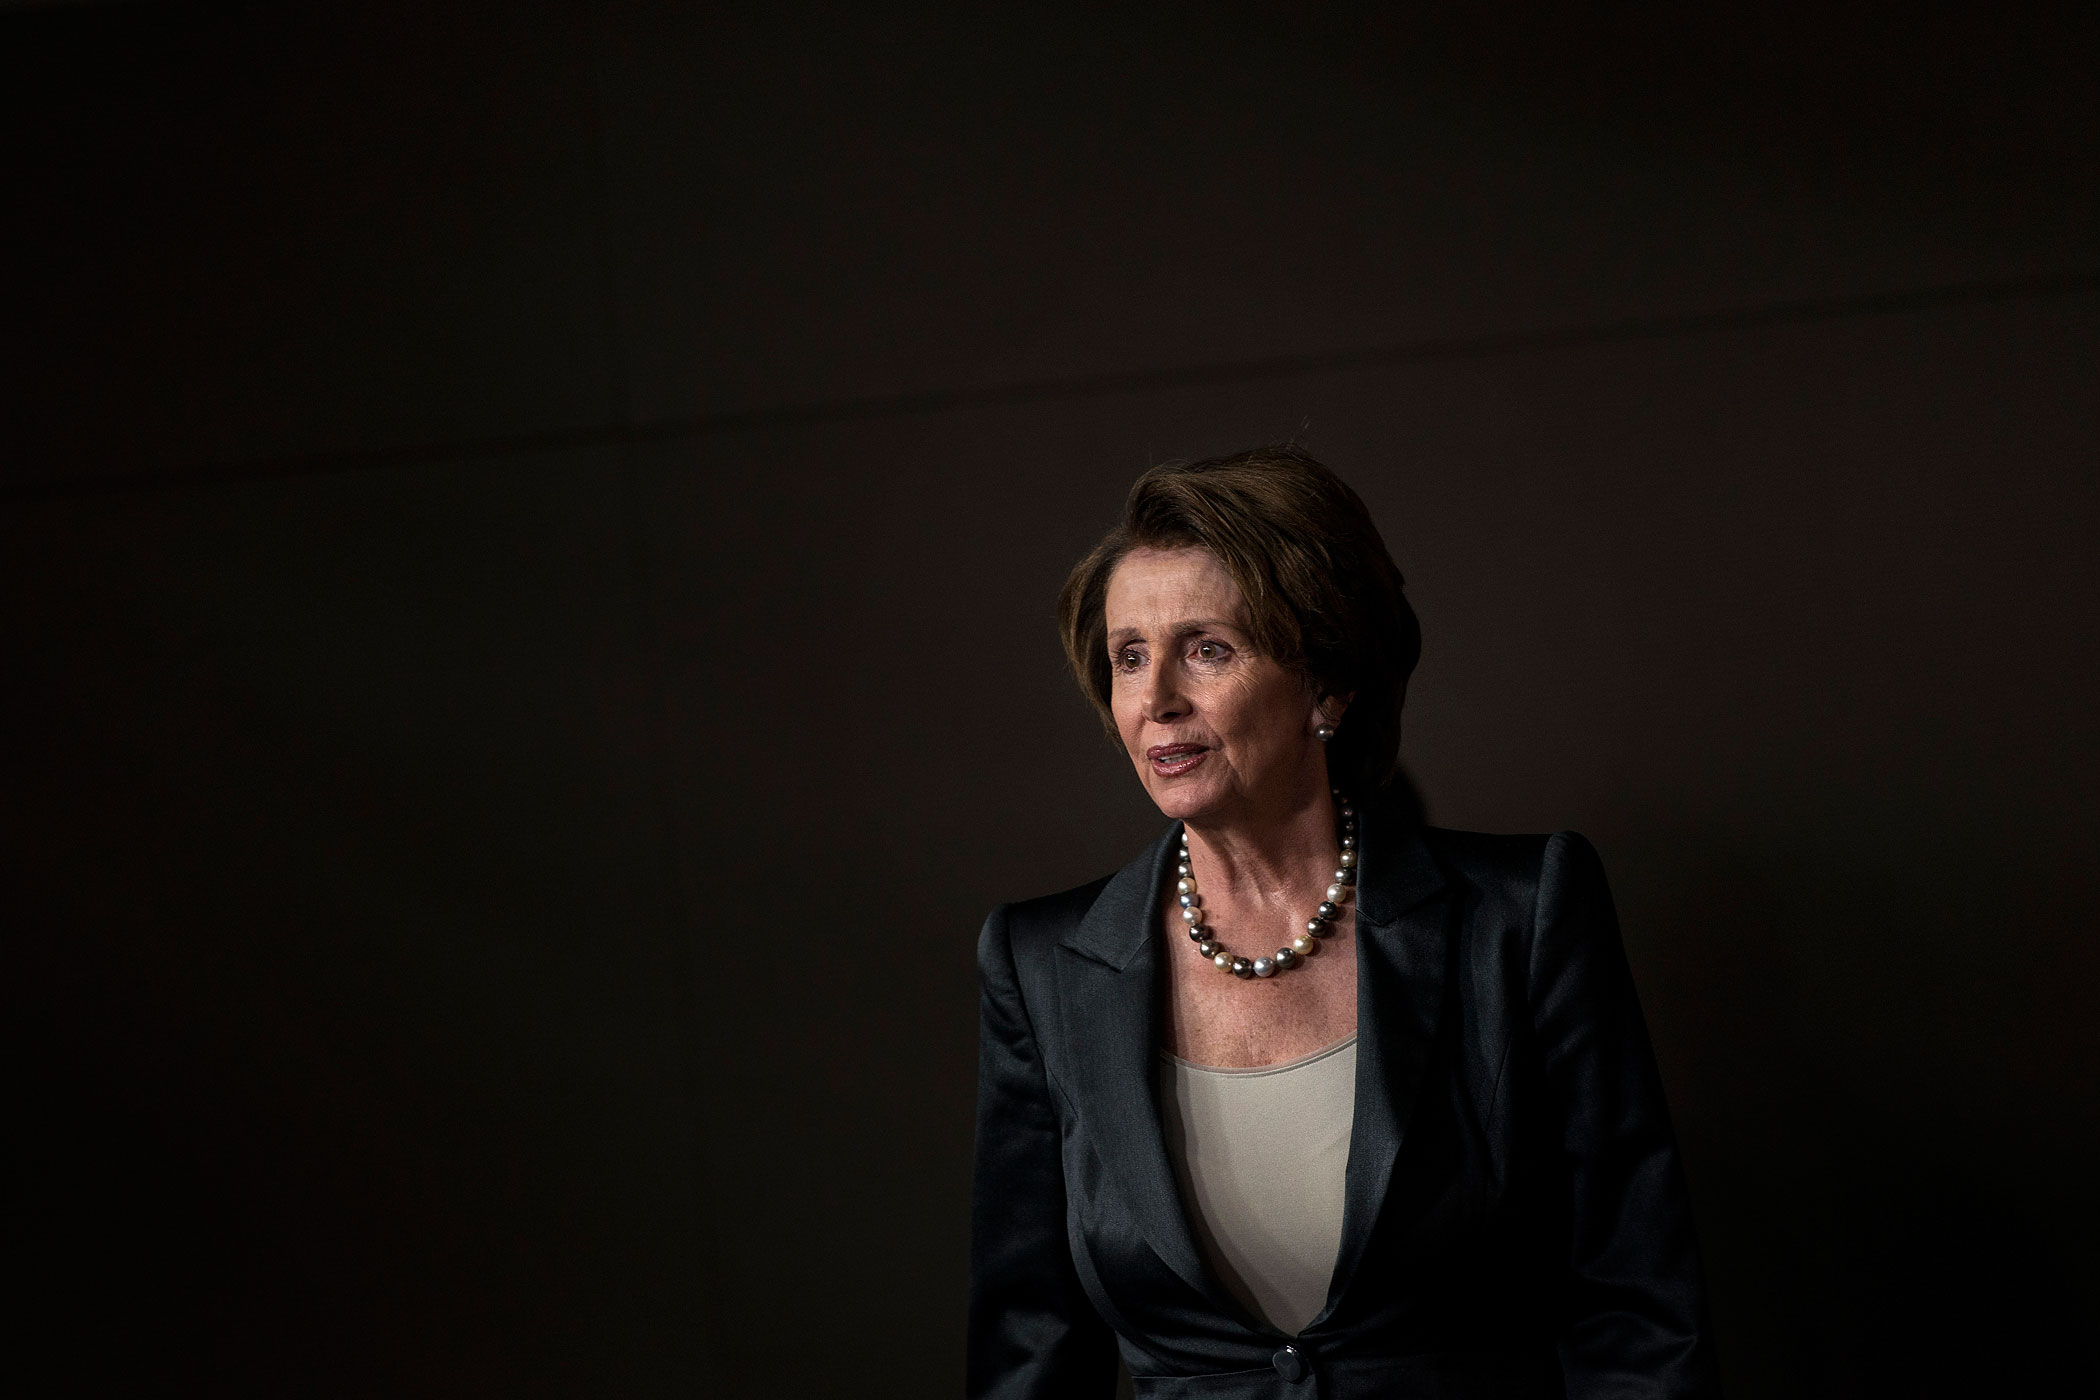 Oct. 3, 2013. House Minority Leader Nancy Pelosi arrives for a during a weekly press conference on Capitol Hill in Washington. The federal government remains shutdown after lawmakers failed to pass a spending bill.